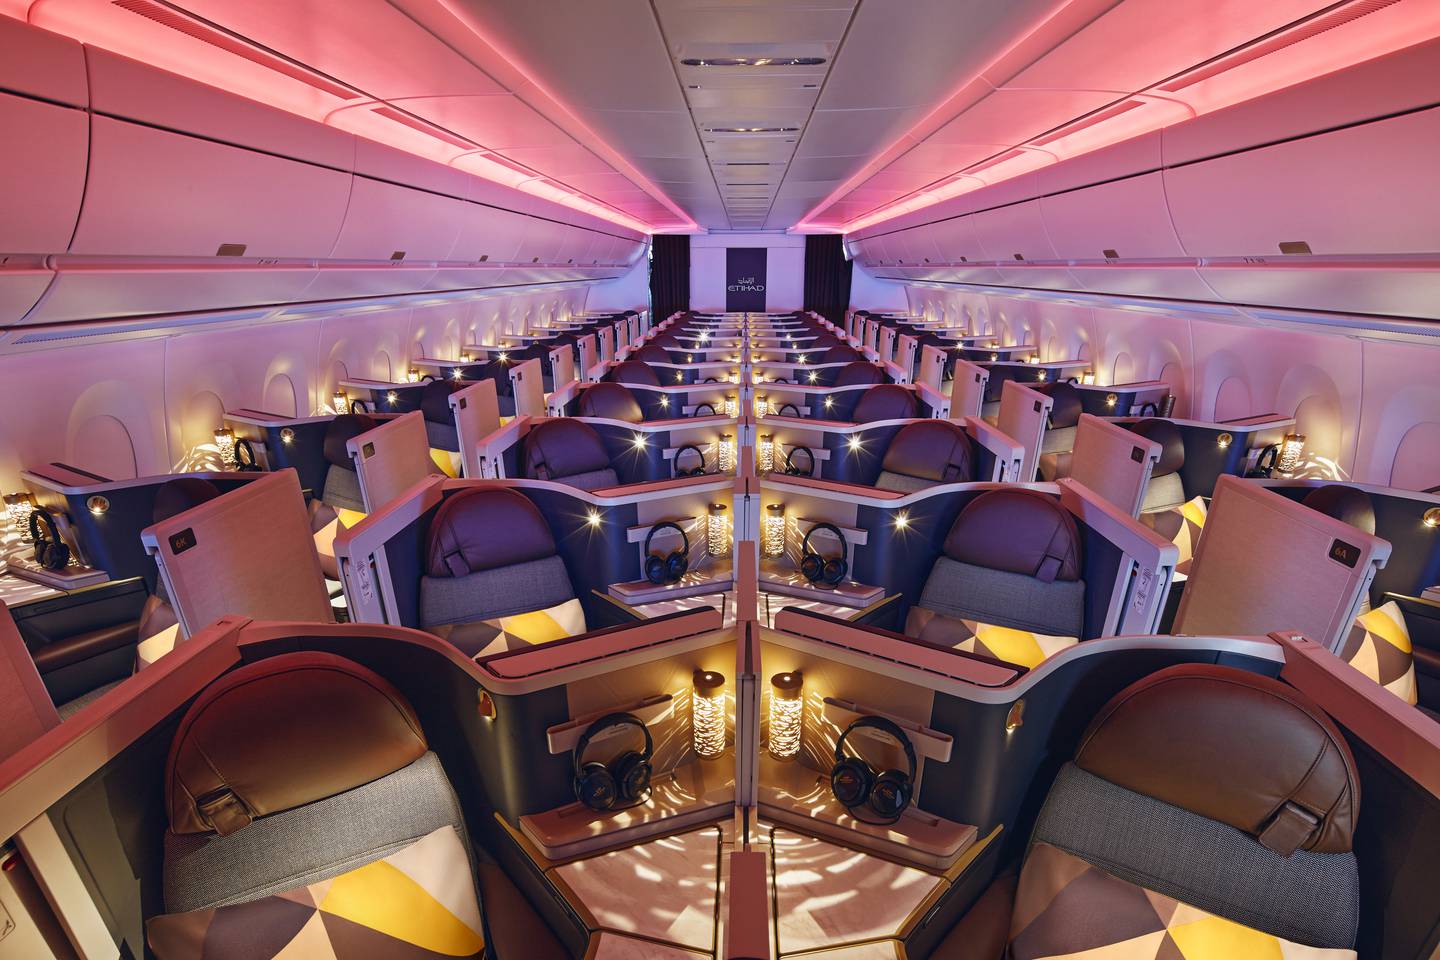 Etihad's new A350-1000 has a dynamic LED lighting system with more than 16 million colours. Photo: Etihad Airways